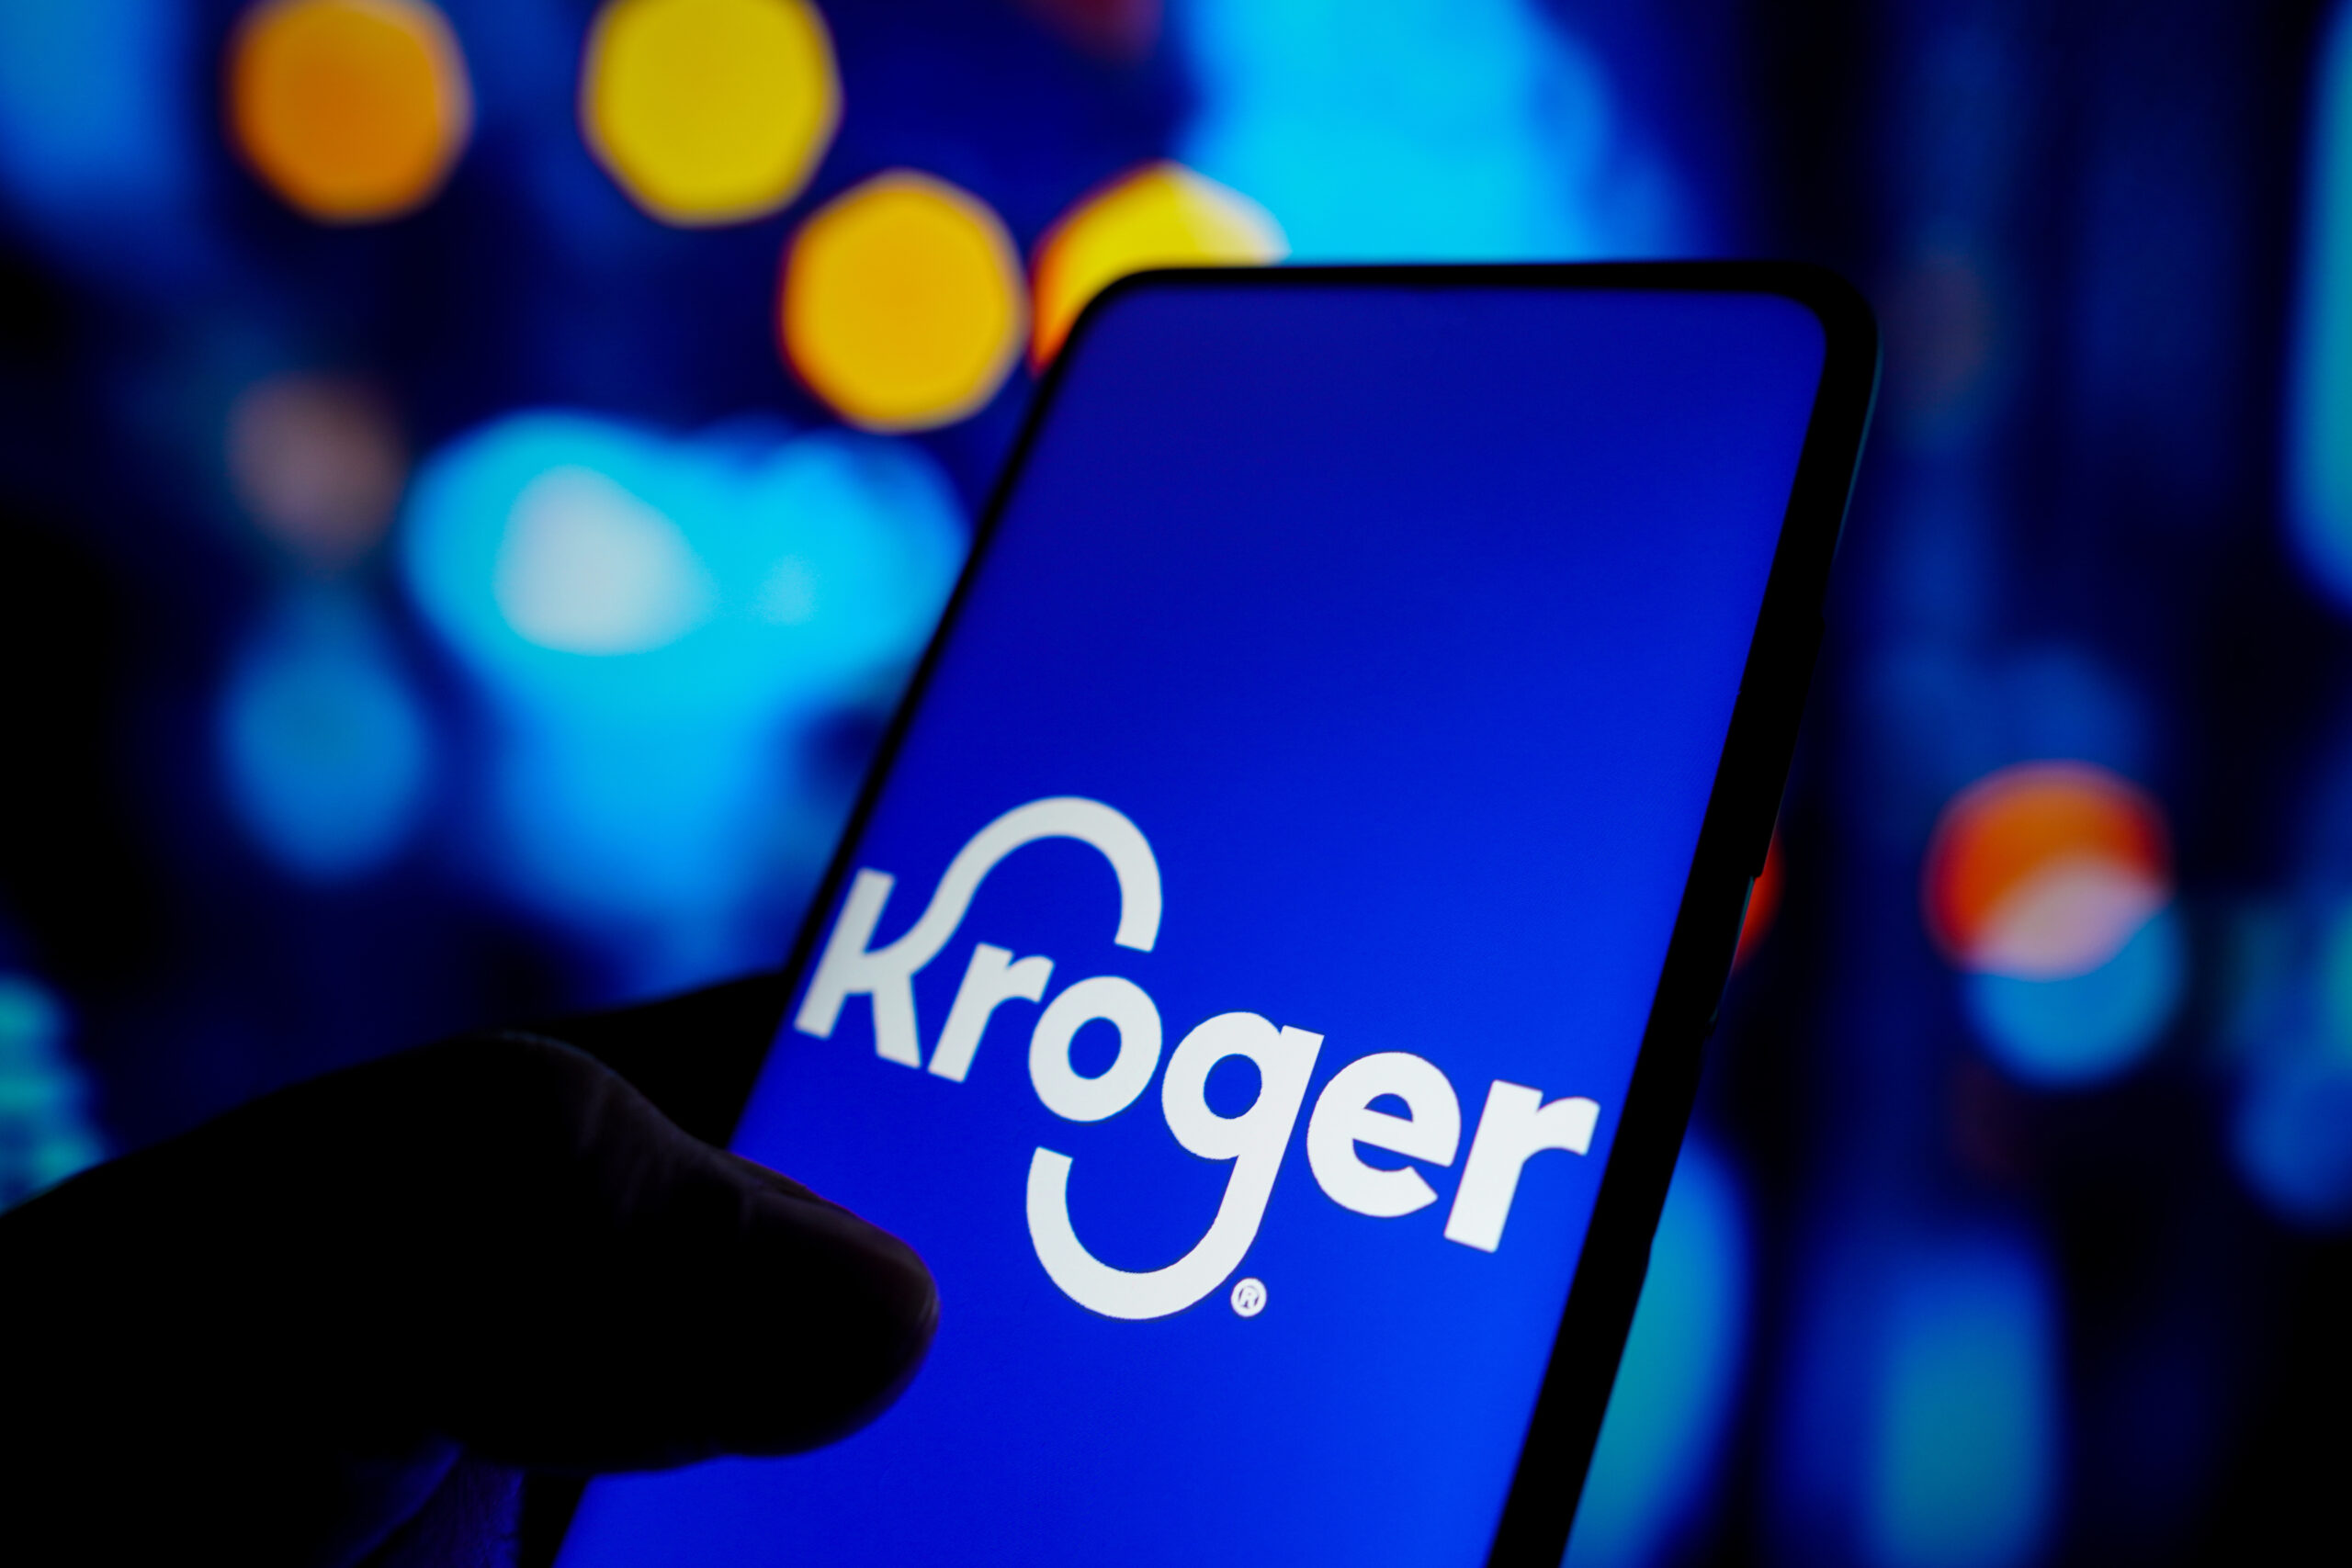 The Kroger logo appears on a smart phone against a blue backdrop.